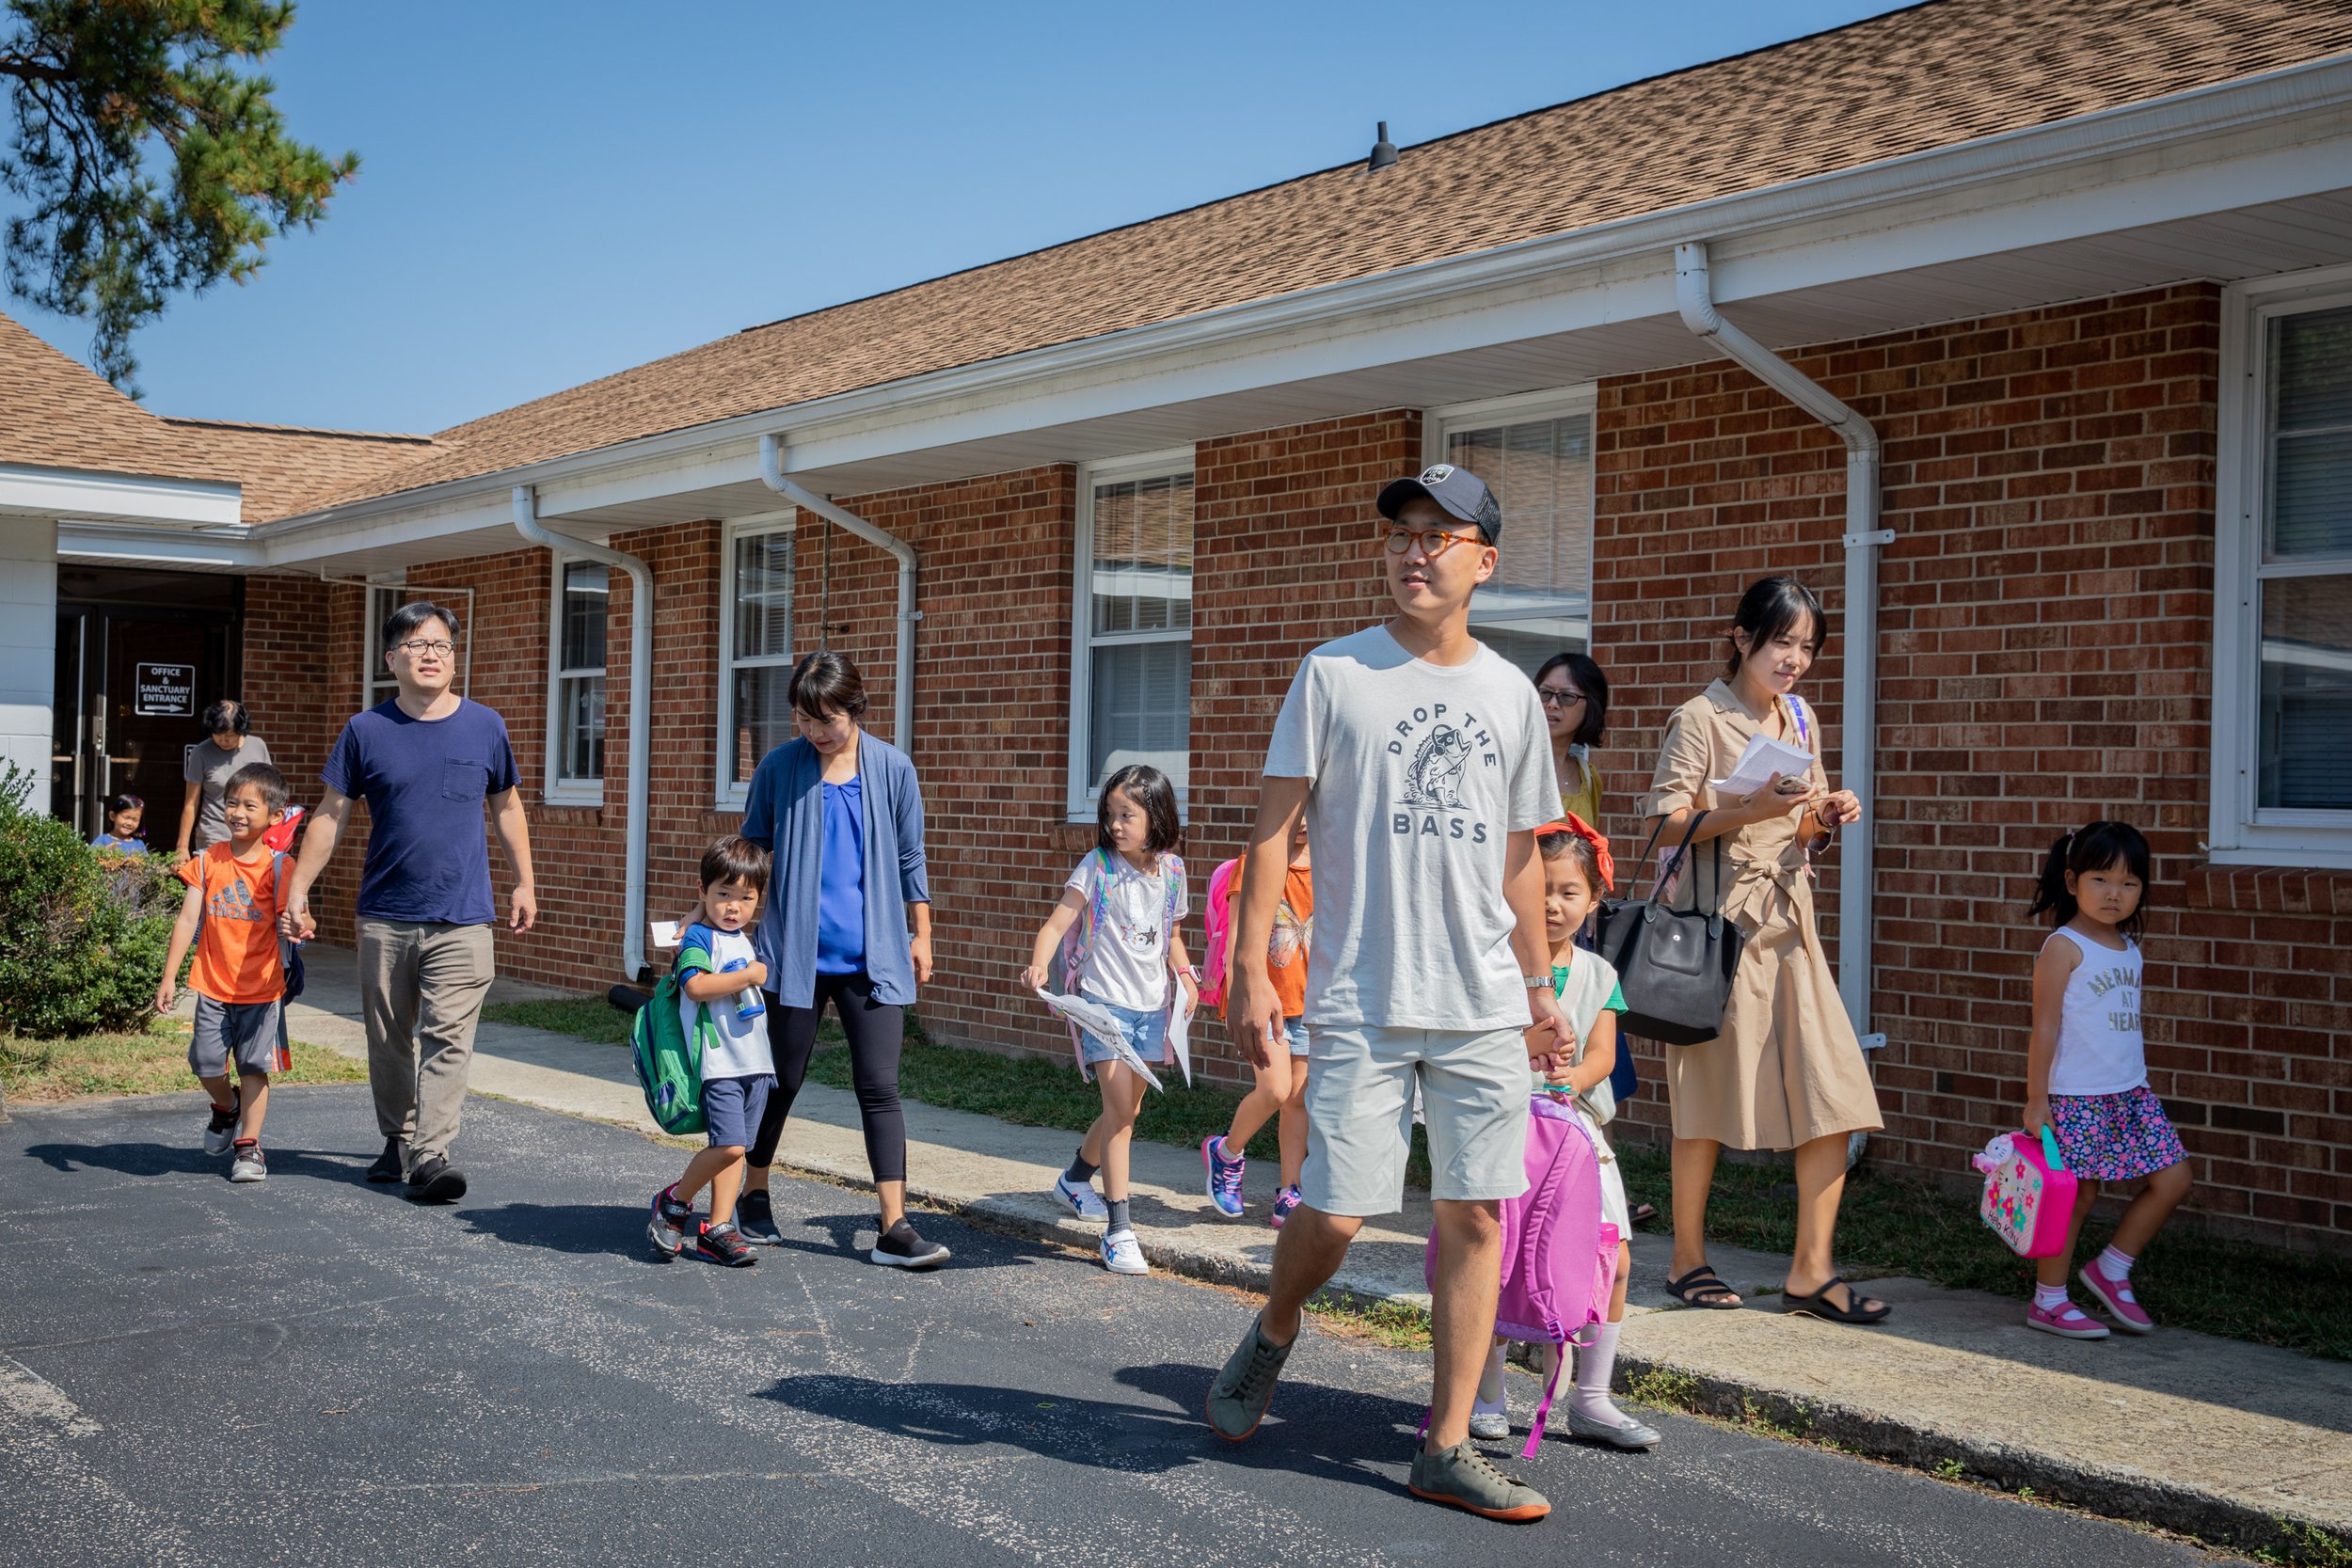  Parents come back to the church to pick up their kids after school. There is a mixture of parents who are Korean, Korean American, and other races. 